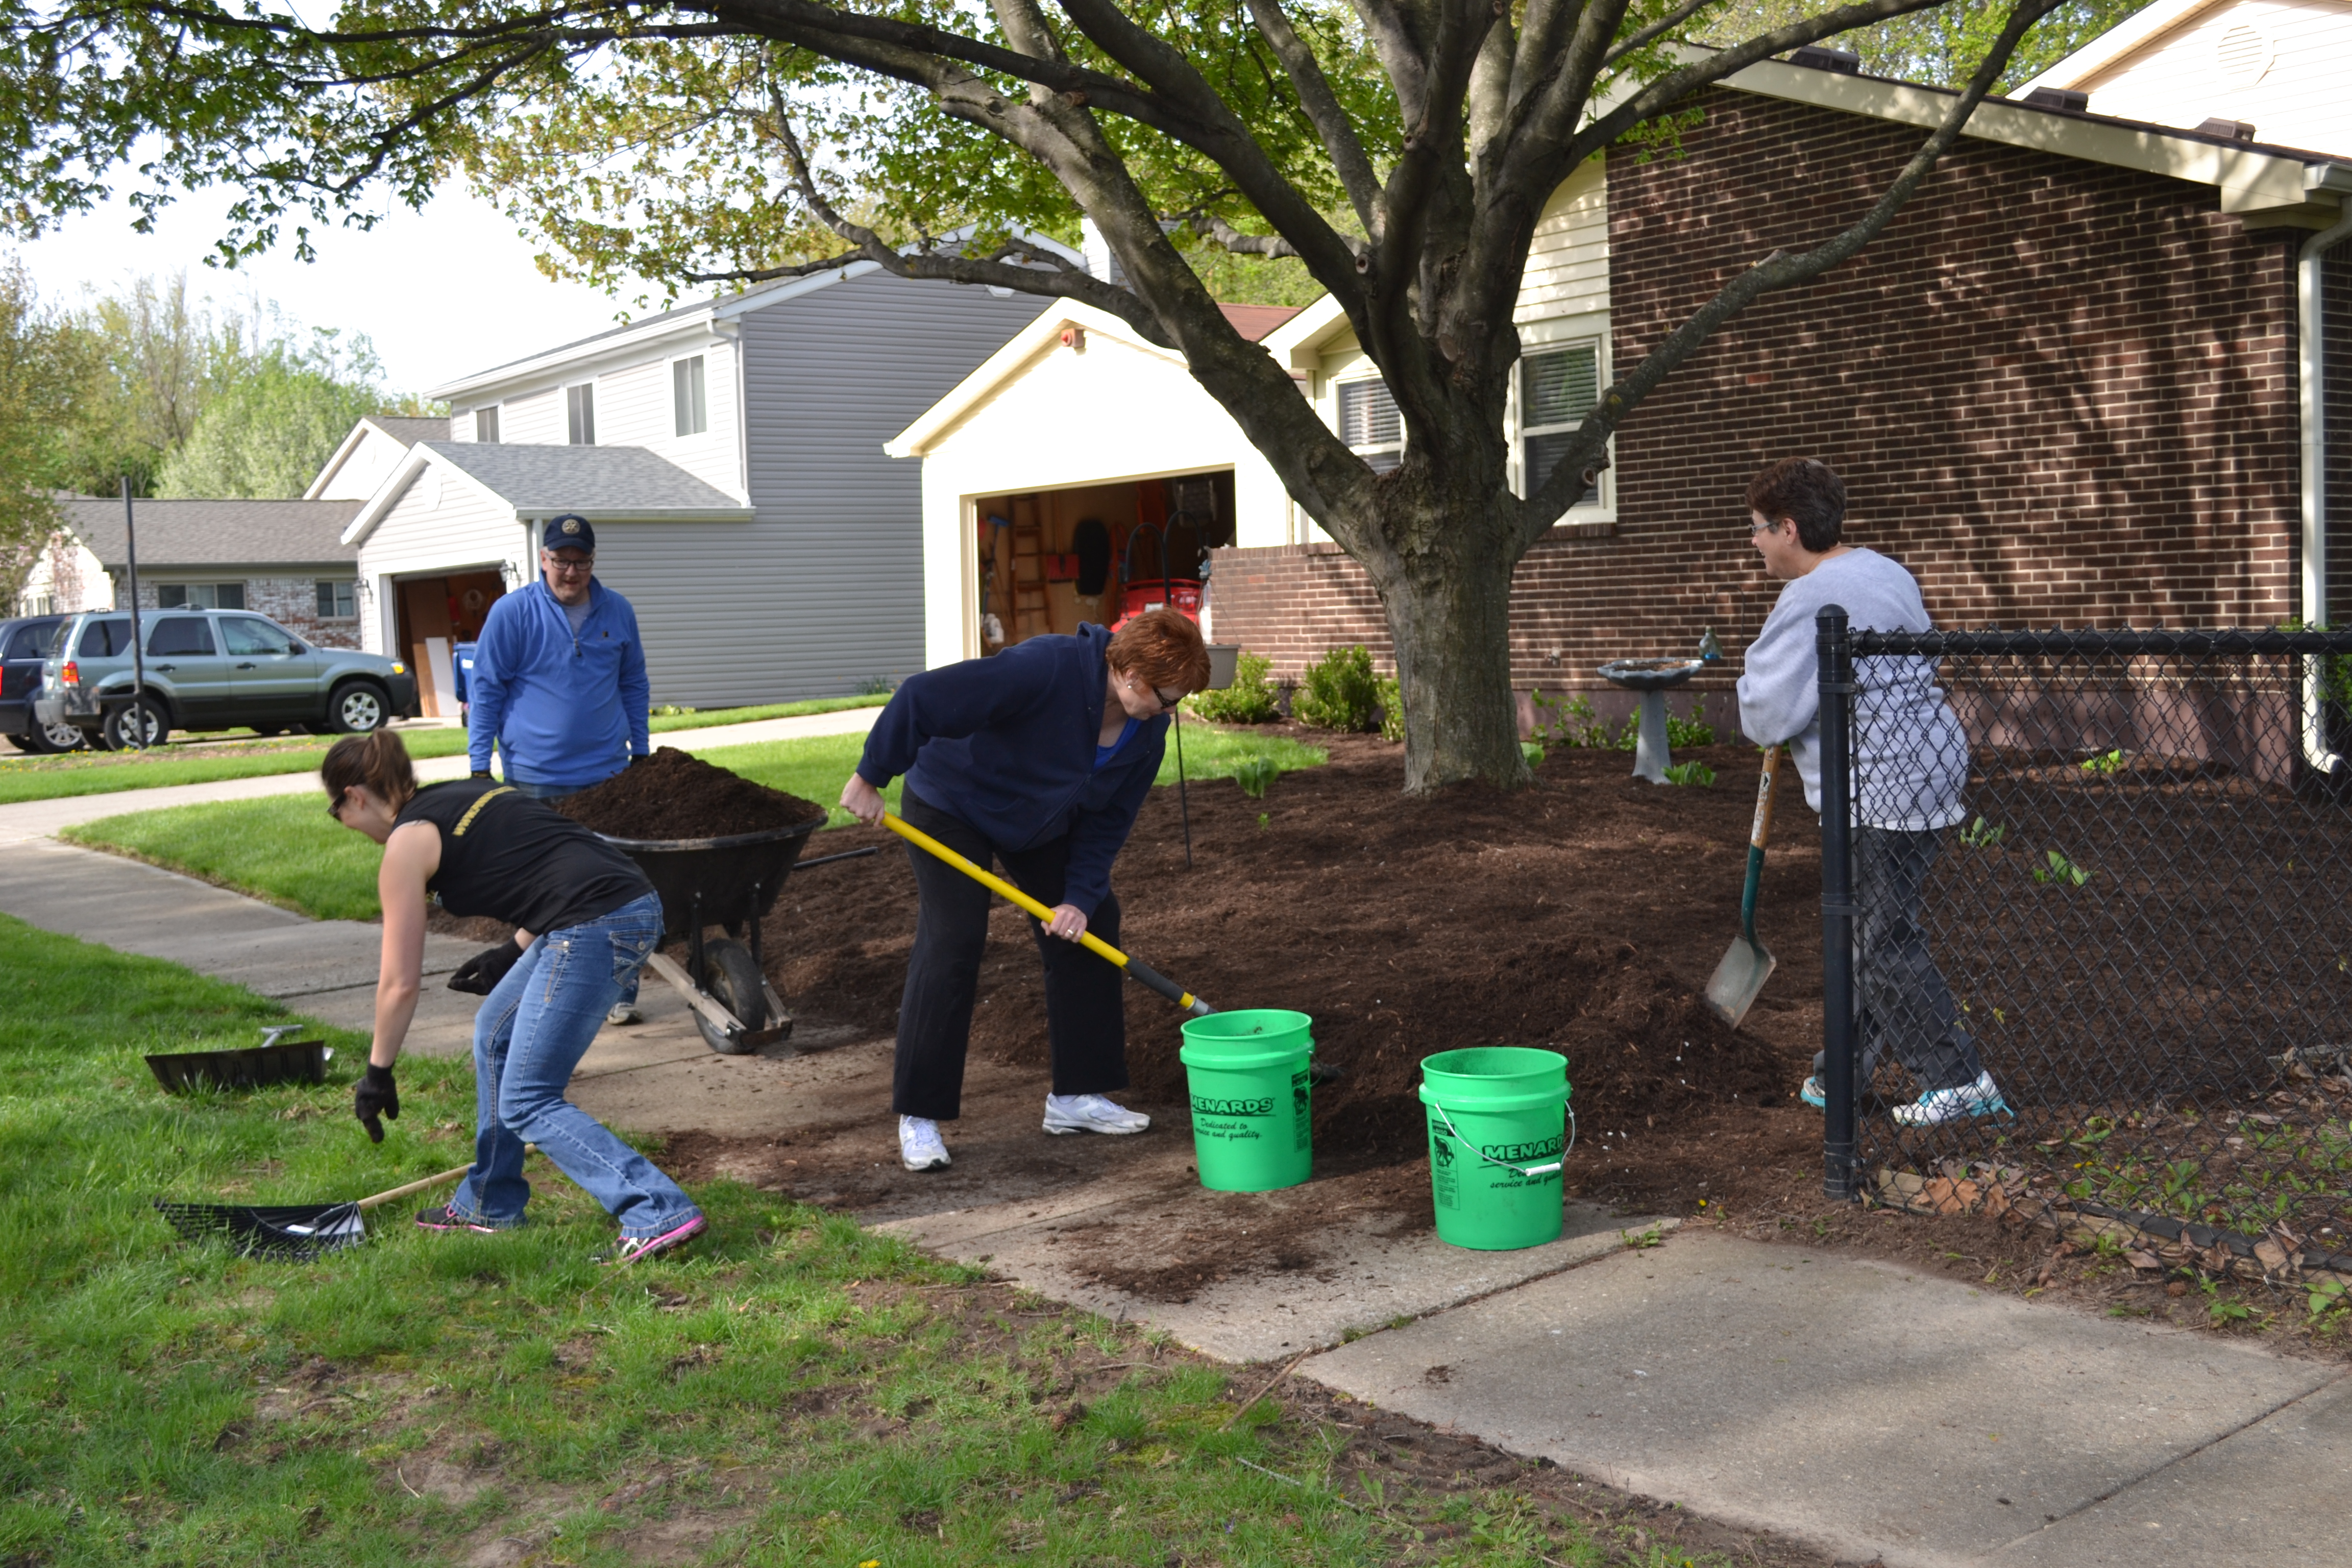 Volunteers work on a yard in Sunblest Countryview as part of a “Keep Fishers Beautiful” neighborhood blitz. (Photo by Ann Craig-Cinnamon)